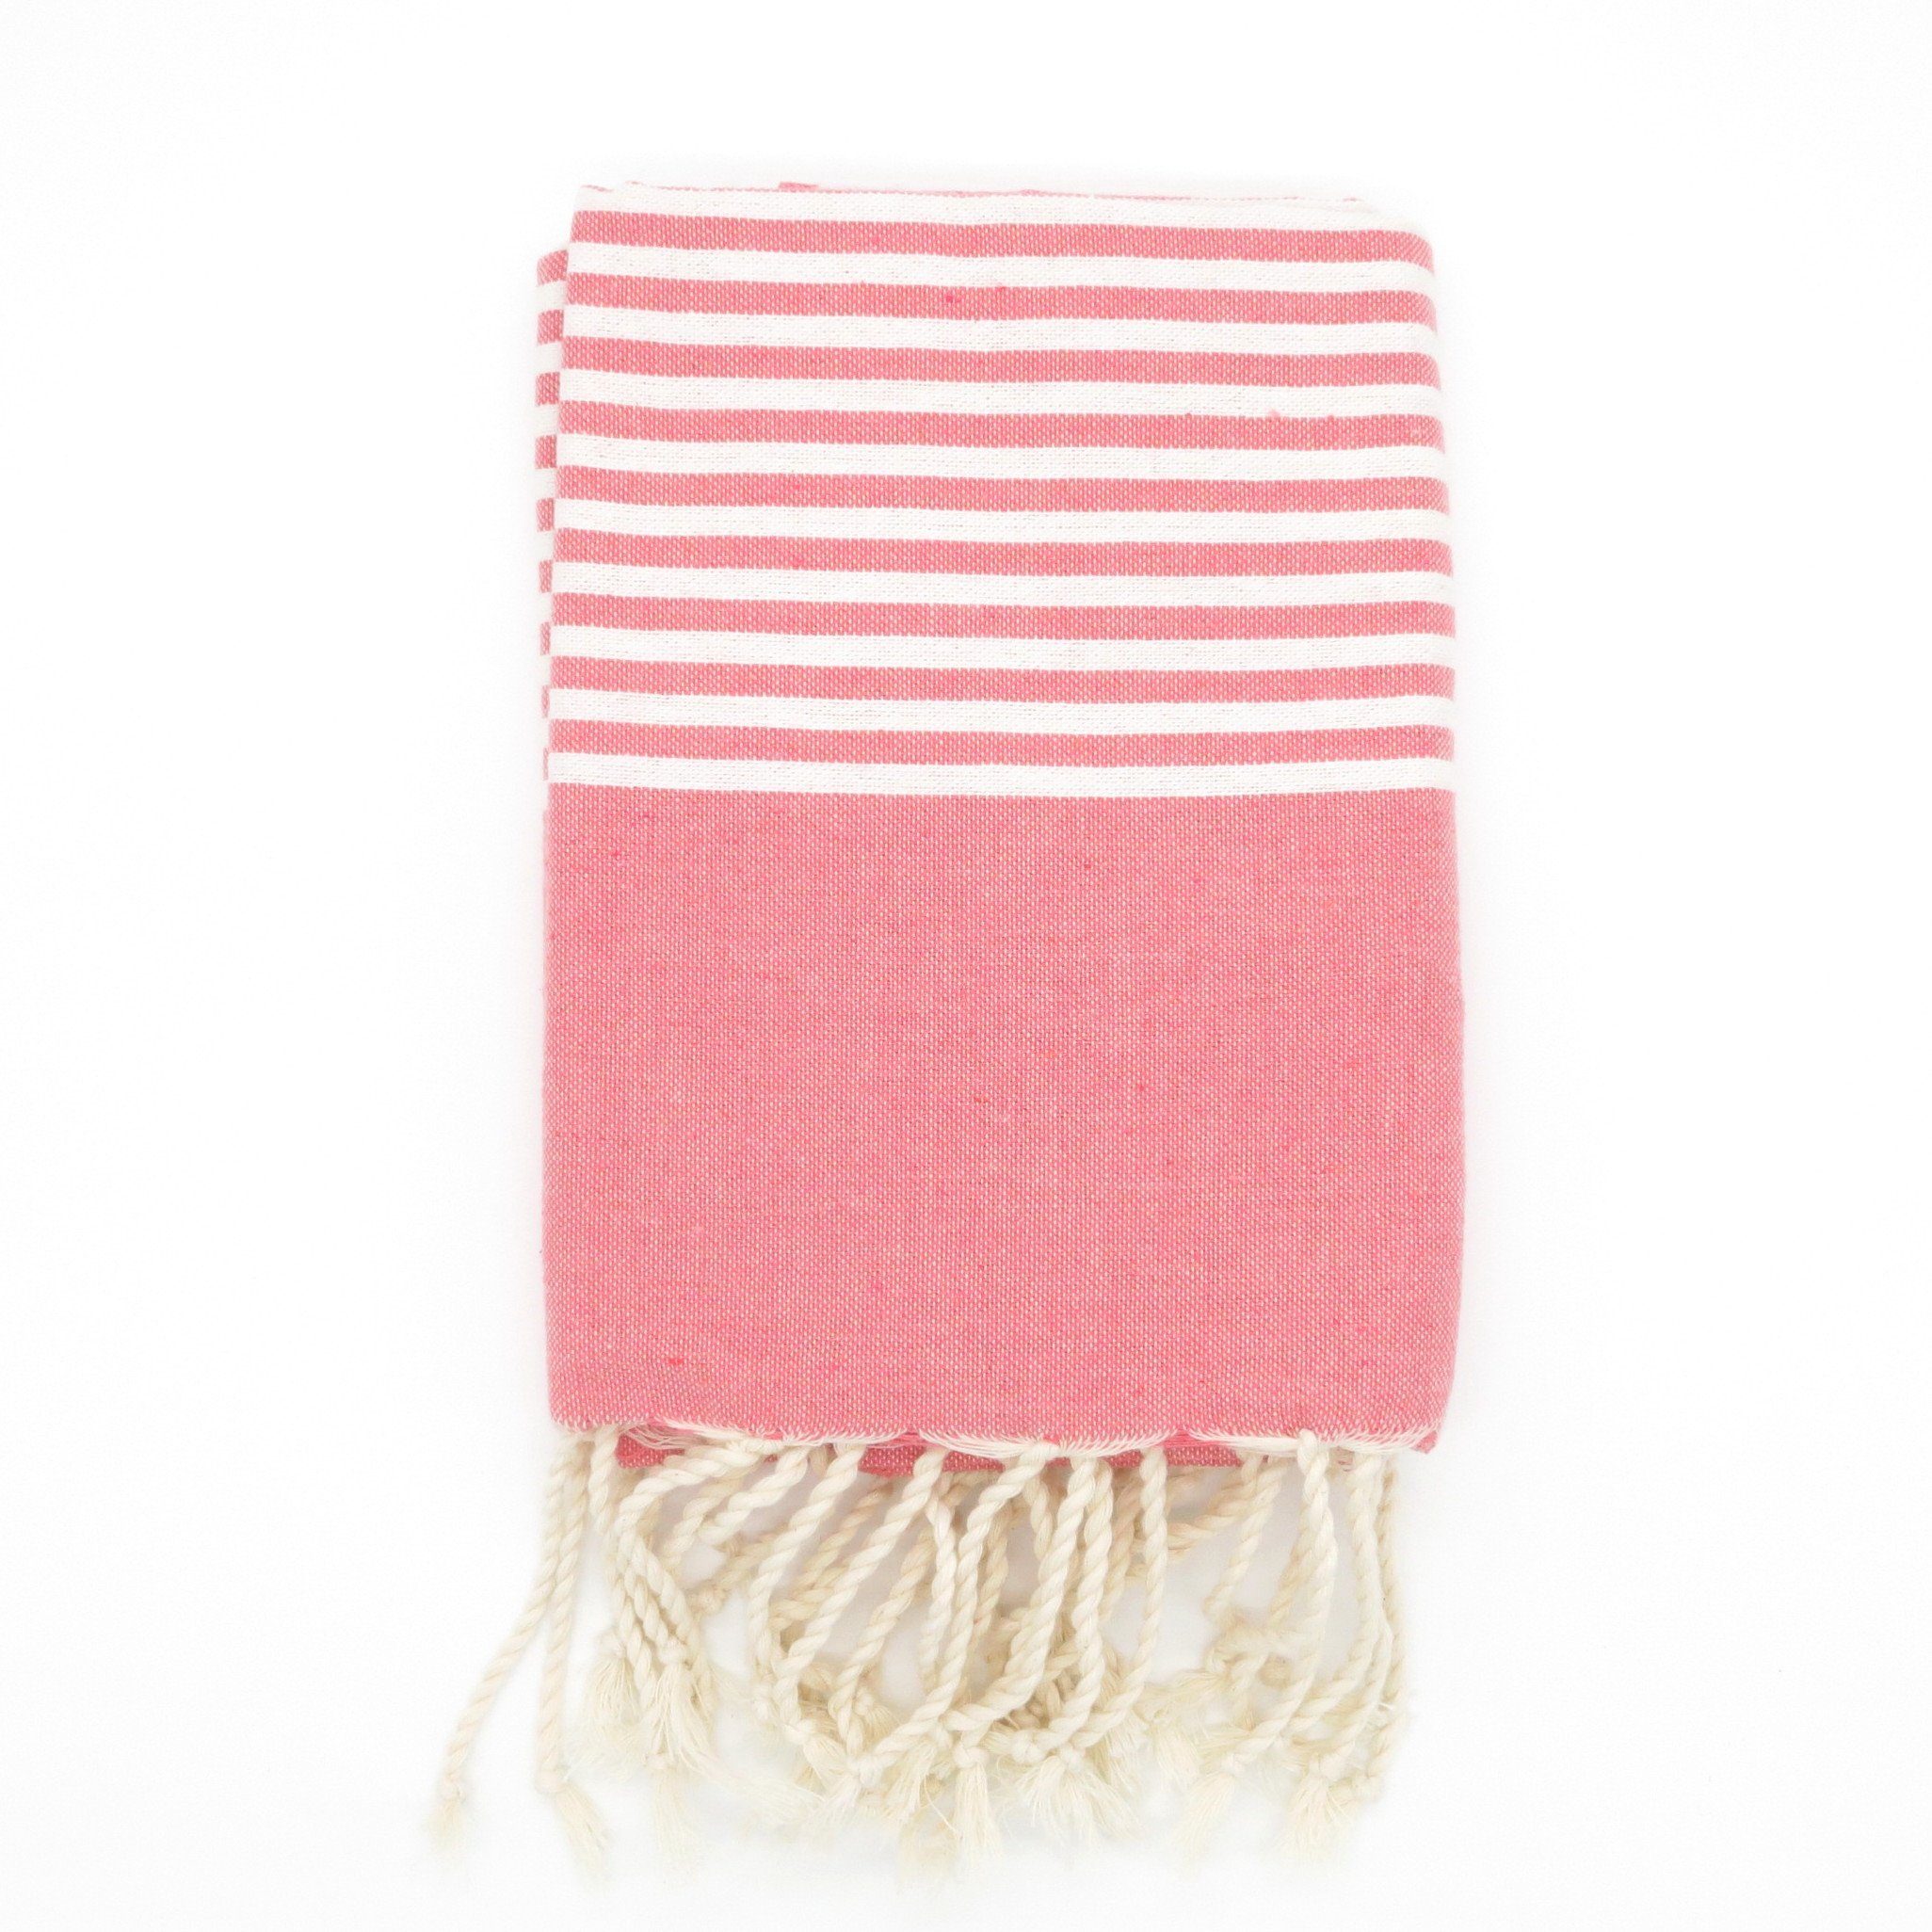 Cotonway Hamamtuch Fouta Fala, 100% recycling Baumwolle Koralle